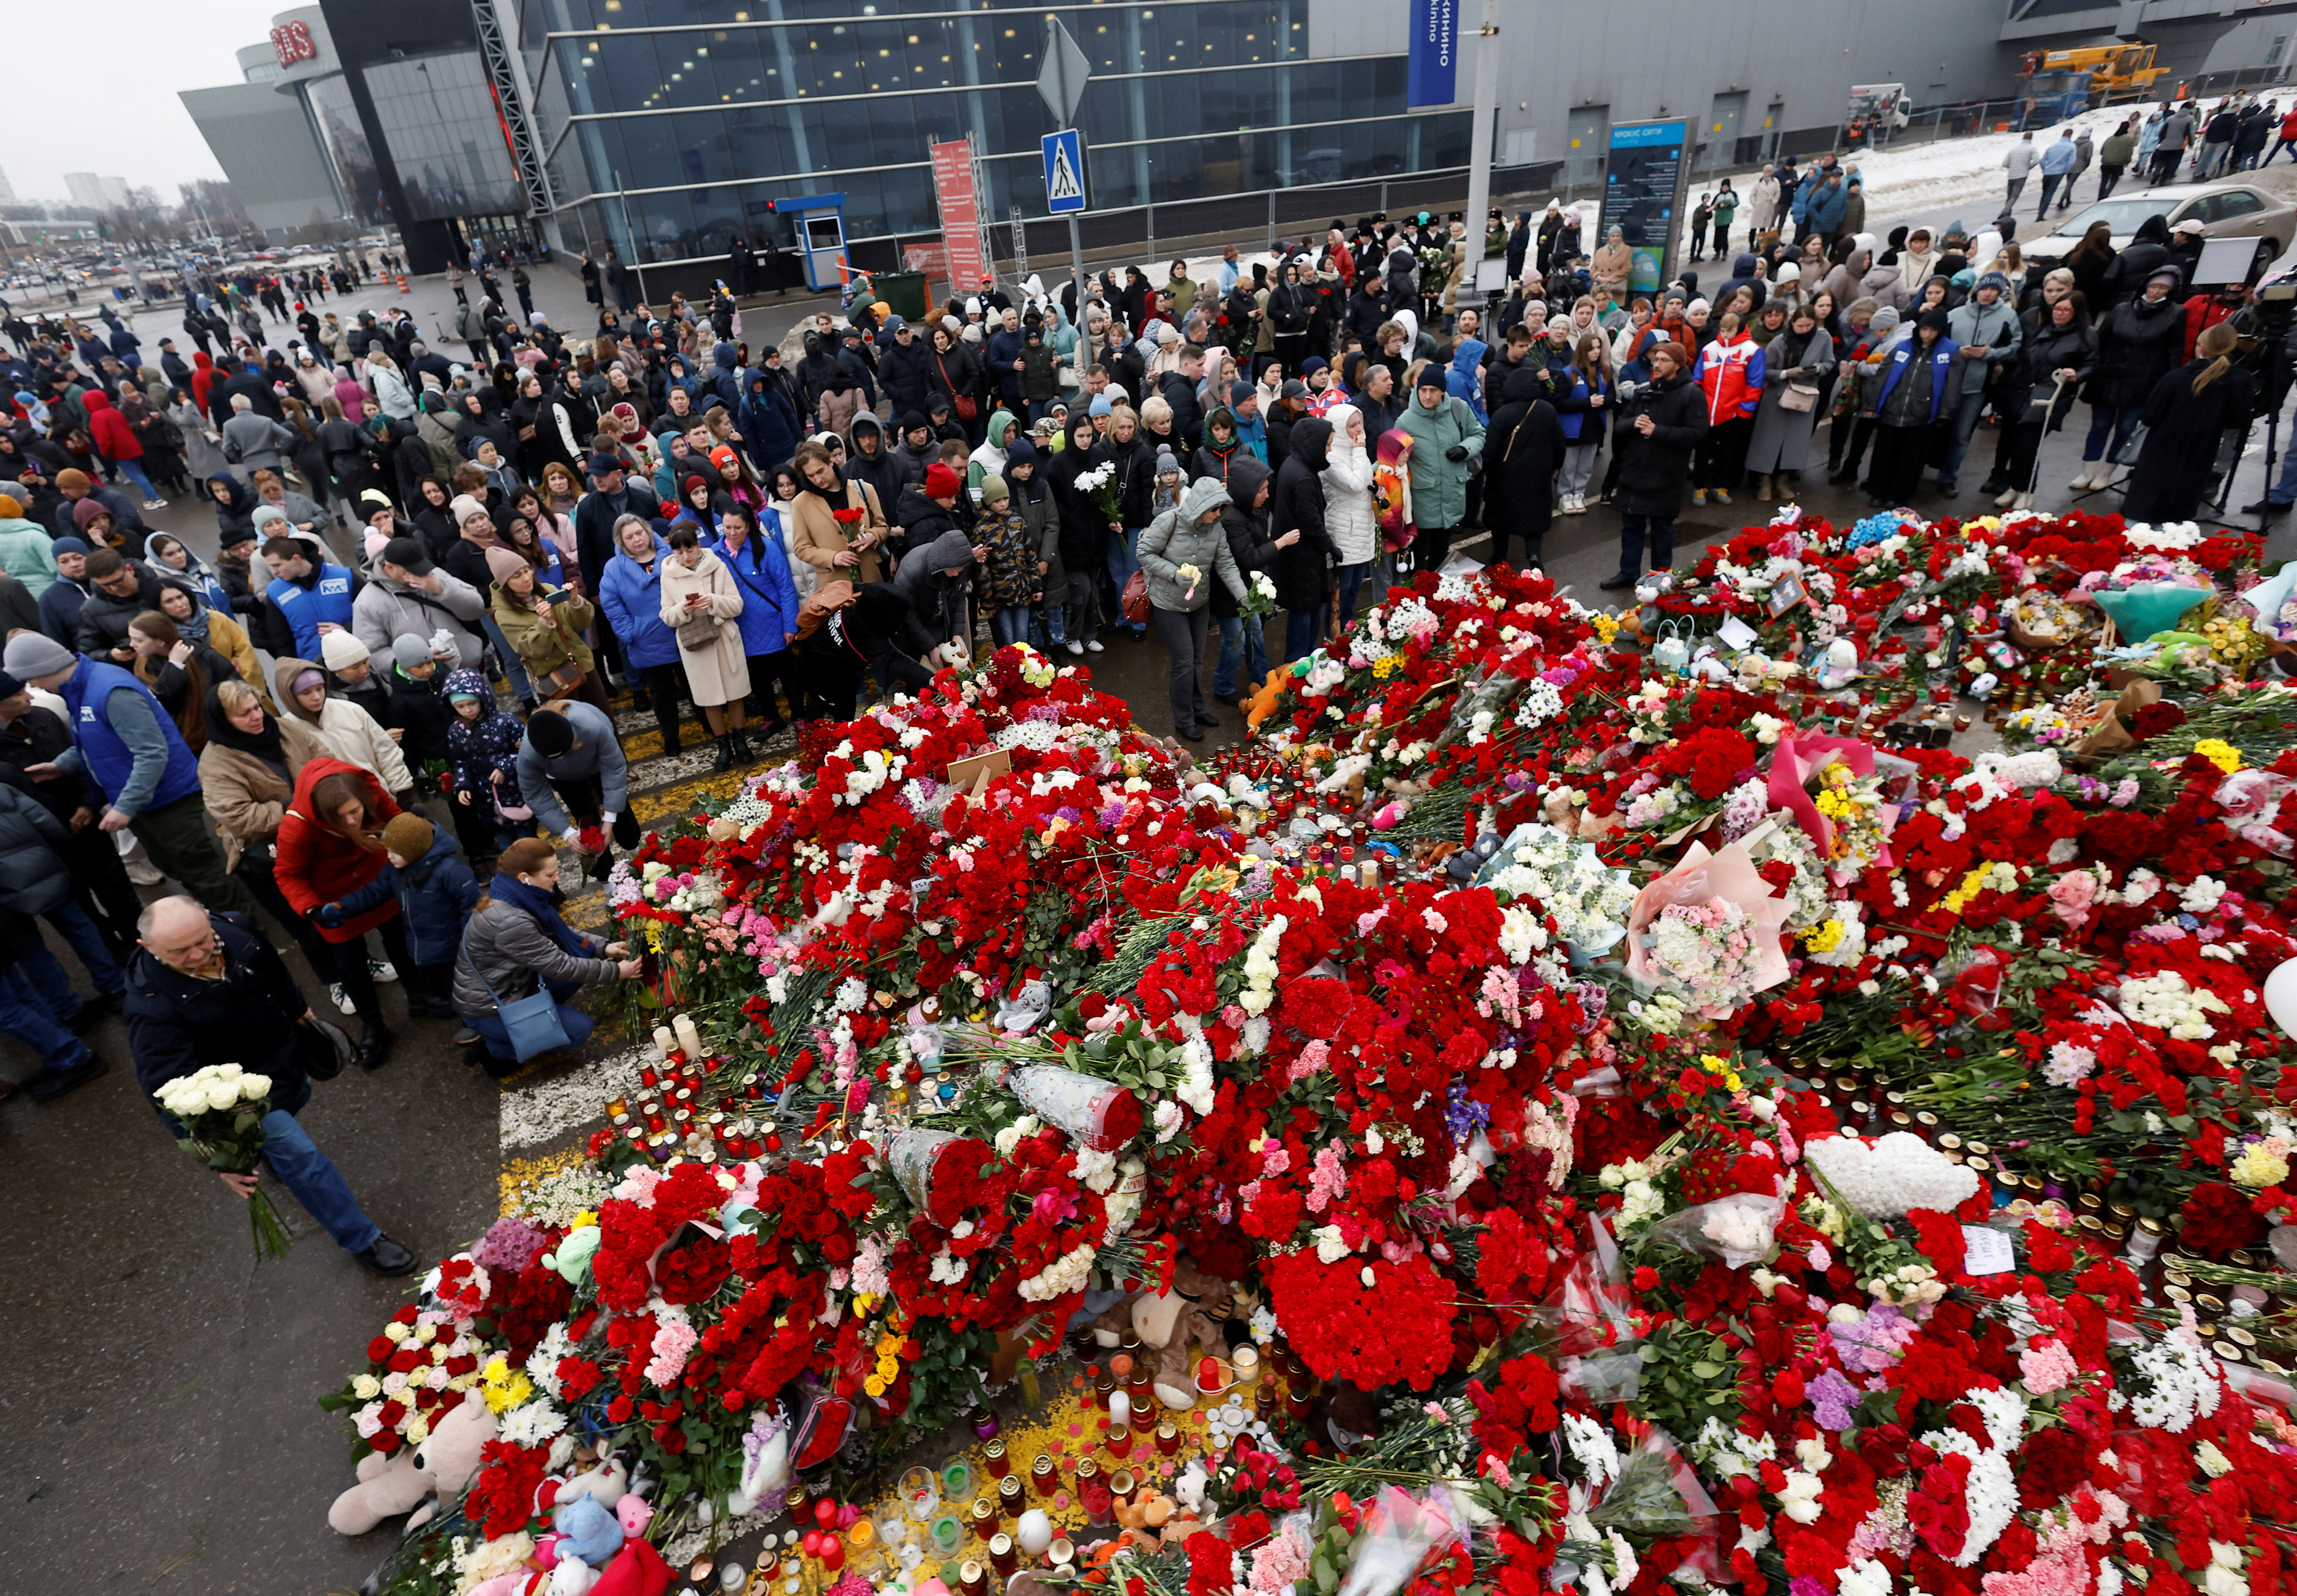 A makeshift memorial to the victims of a shooting attack set up outside the Crocus City Hall concert venue in the Moscow Region